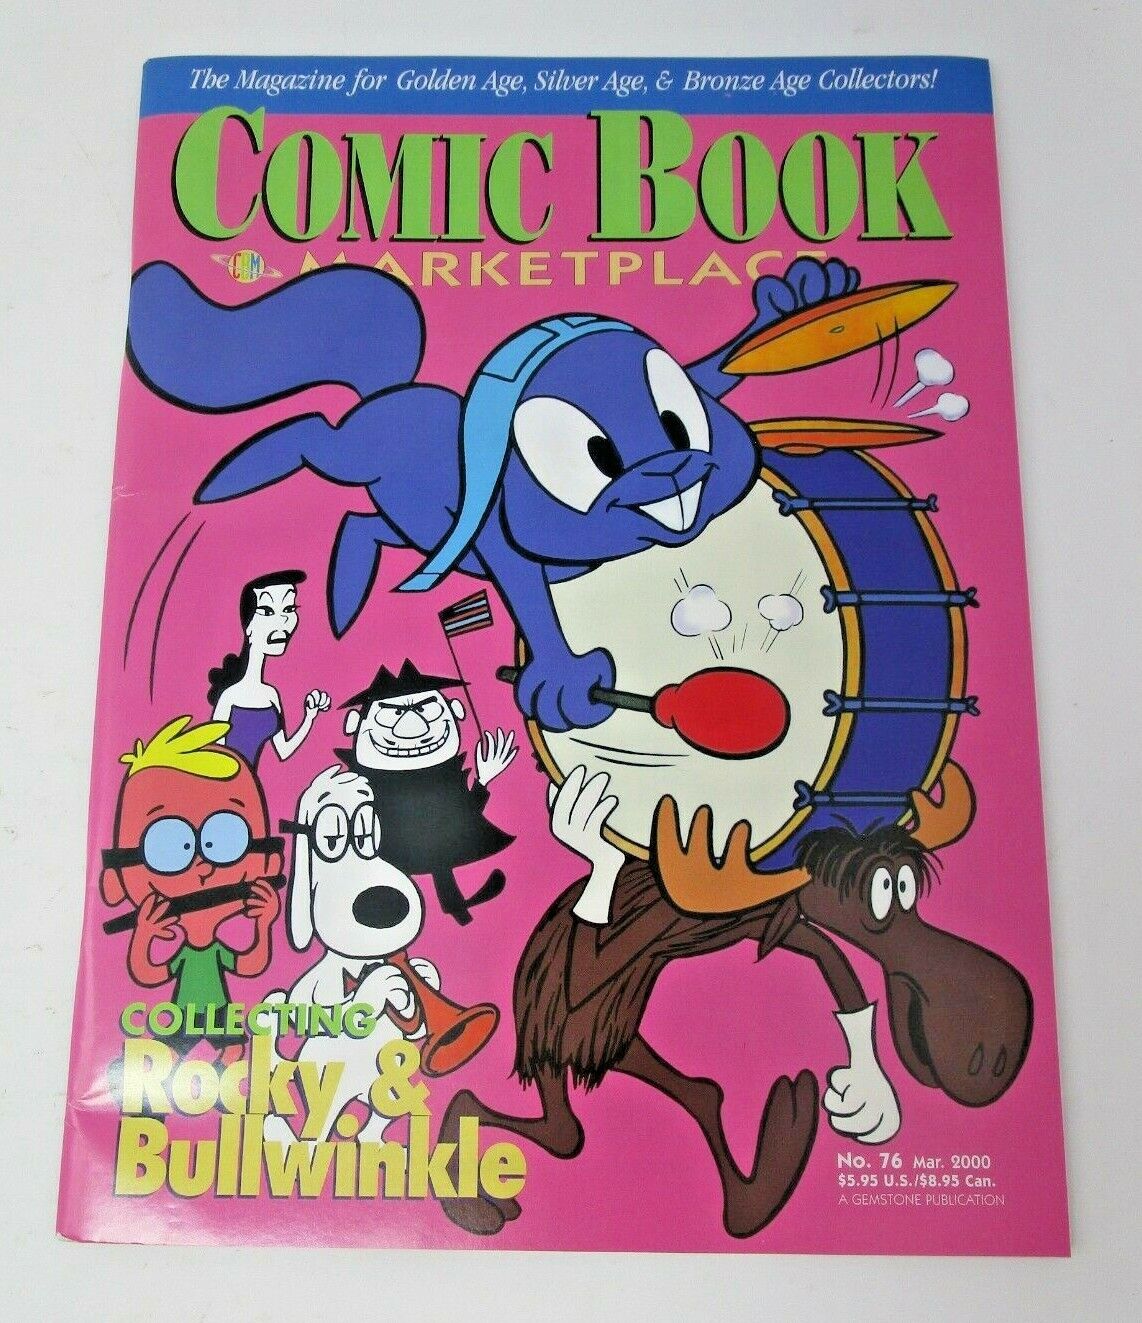 Comic Book Marketplace #76 March 2000 [FN] Magazine 1993 Series